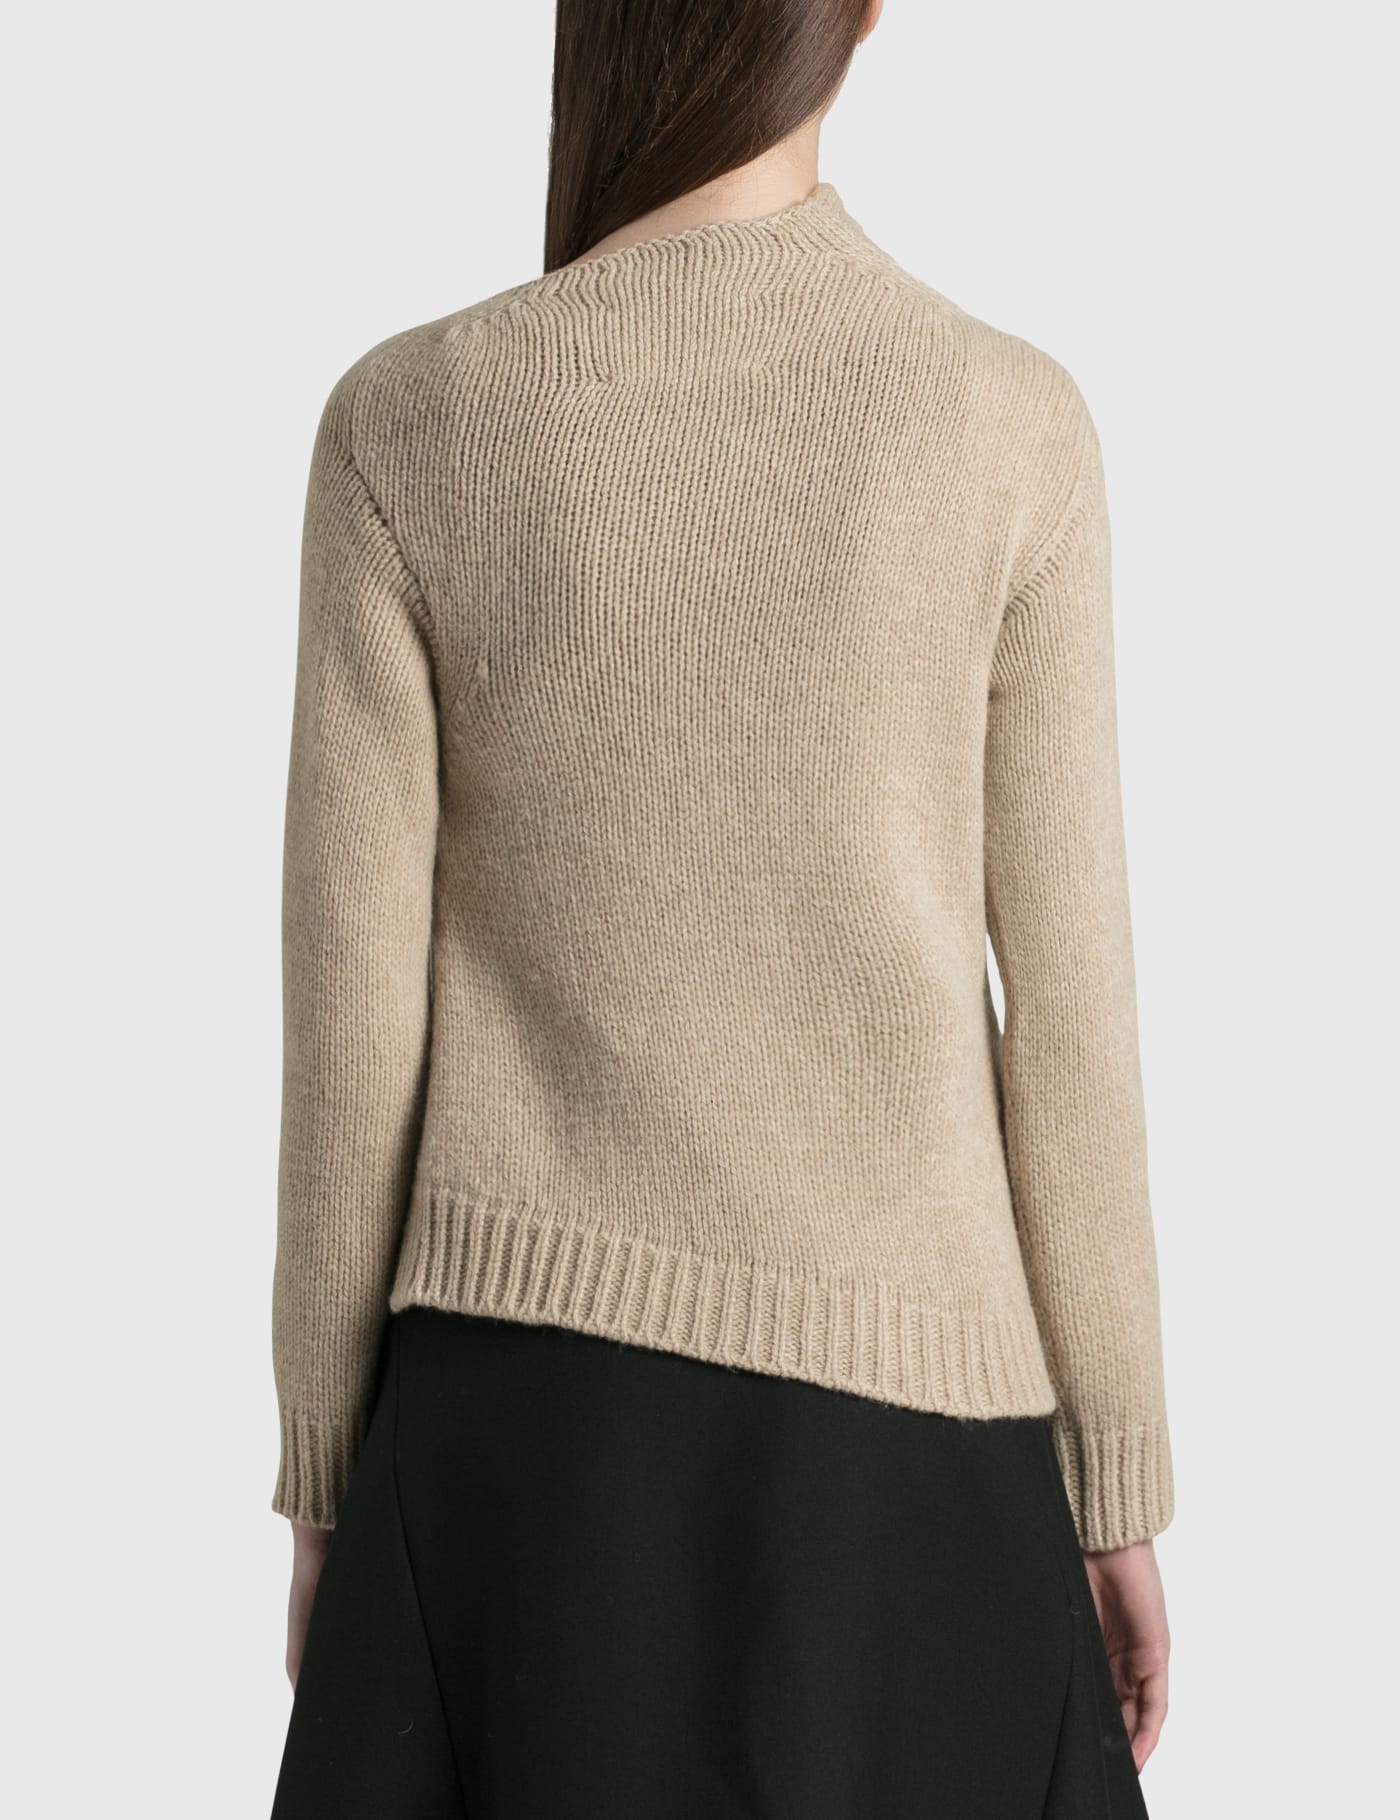 Jil Sander - Asymmetric Sweater | HBX - Globally Curated Fashion and  Lifestyle by Hypebeast